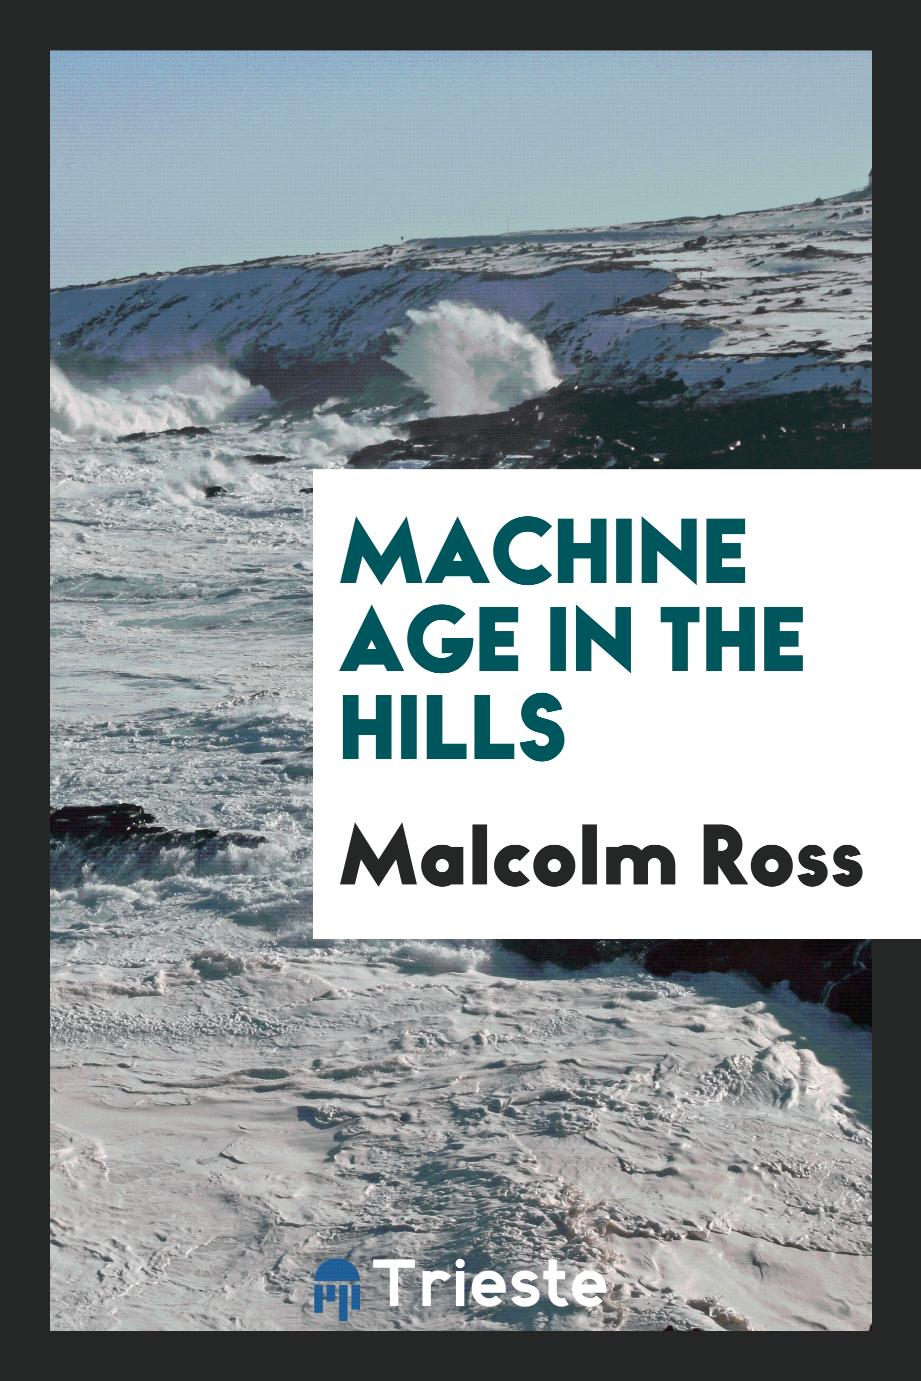 Machine age in the hills